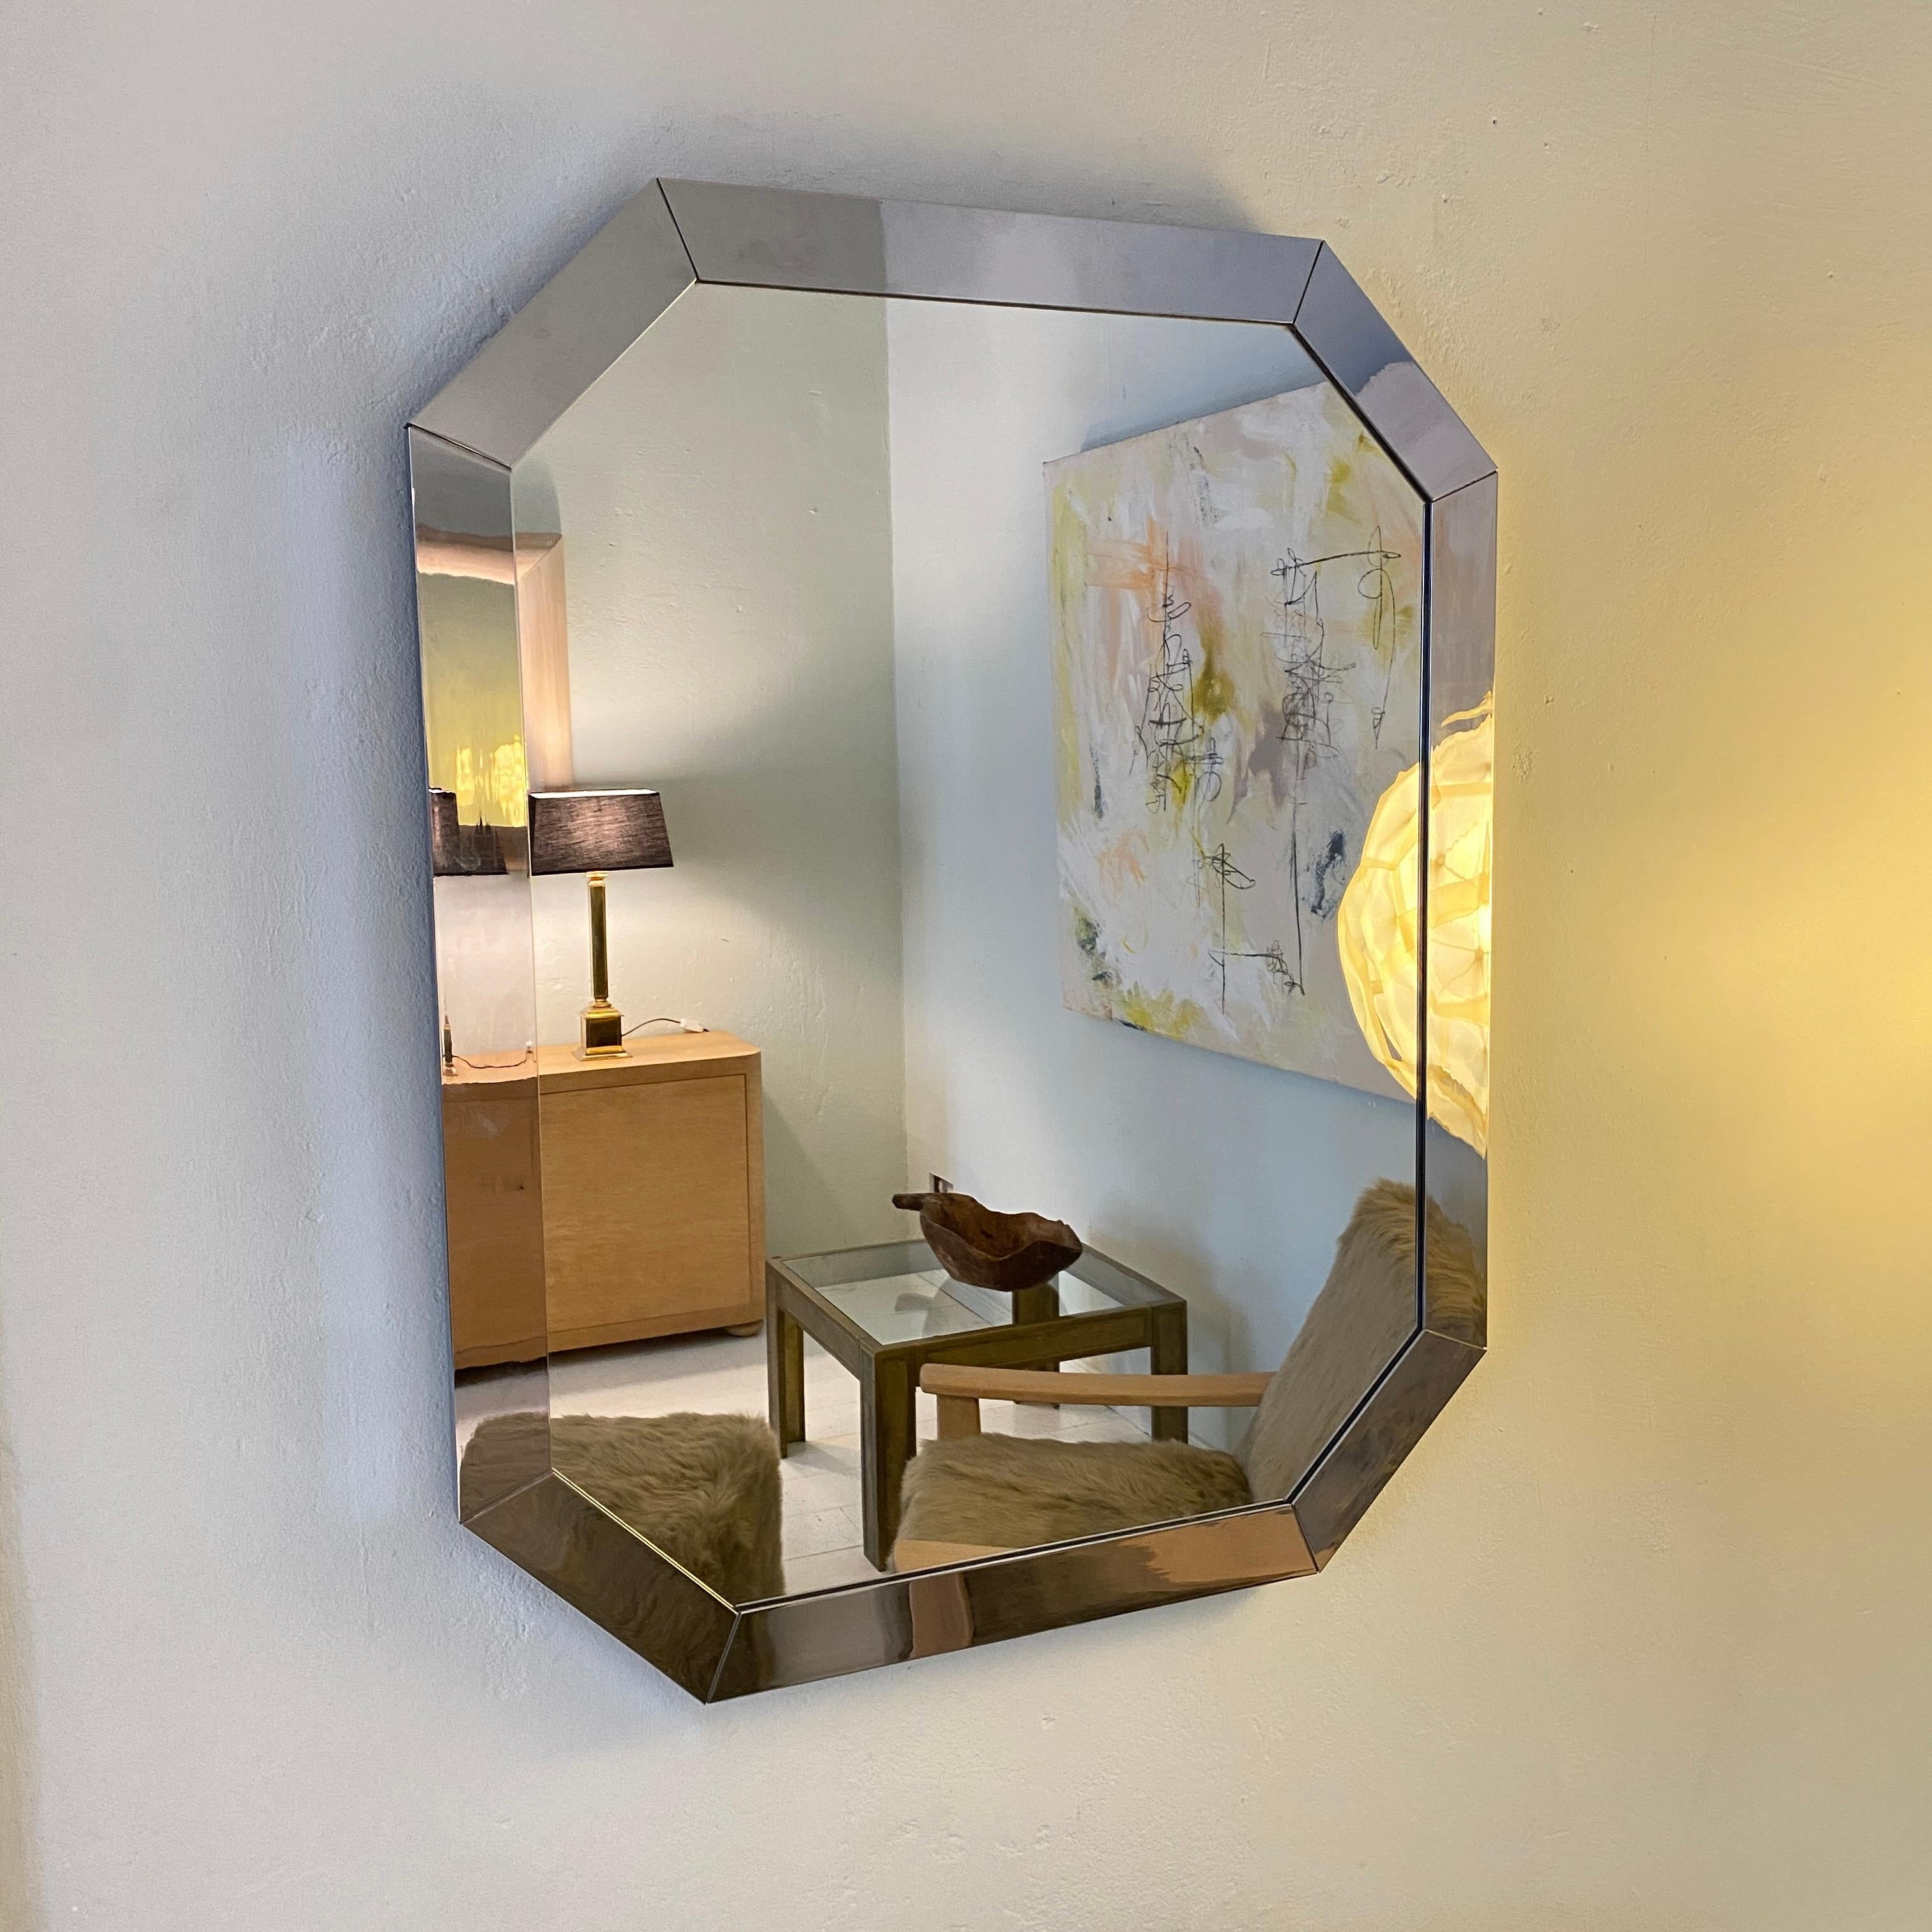 This large German Mid-Century Modern chrome frame octagonal wall mirror was made around 1970.
It is from fantastic quality and in a perfect vintage condition.

A unique piece which is a great eye-catcher for your antique, modern, space age or